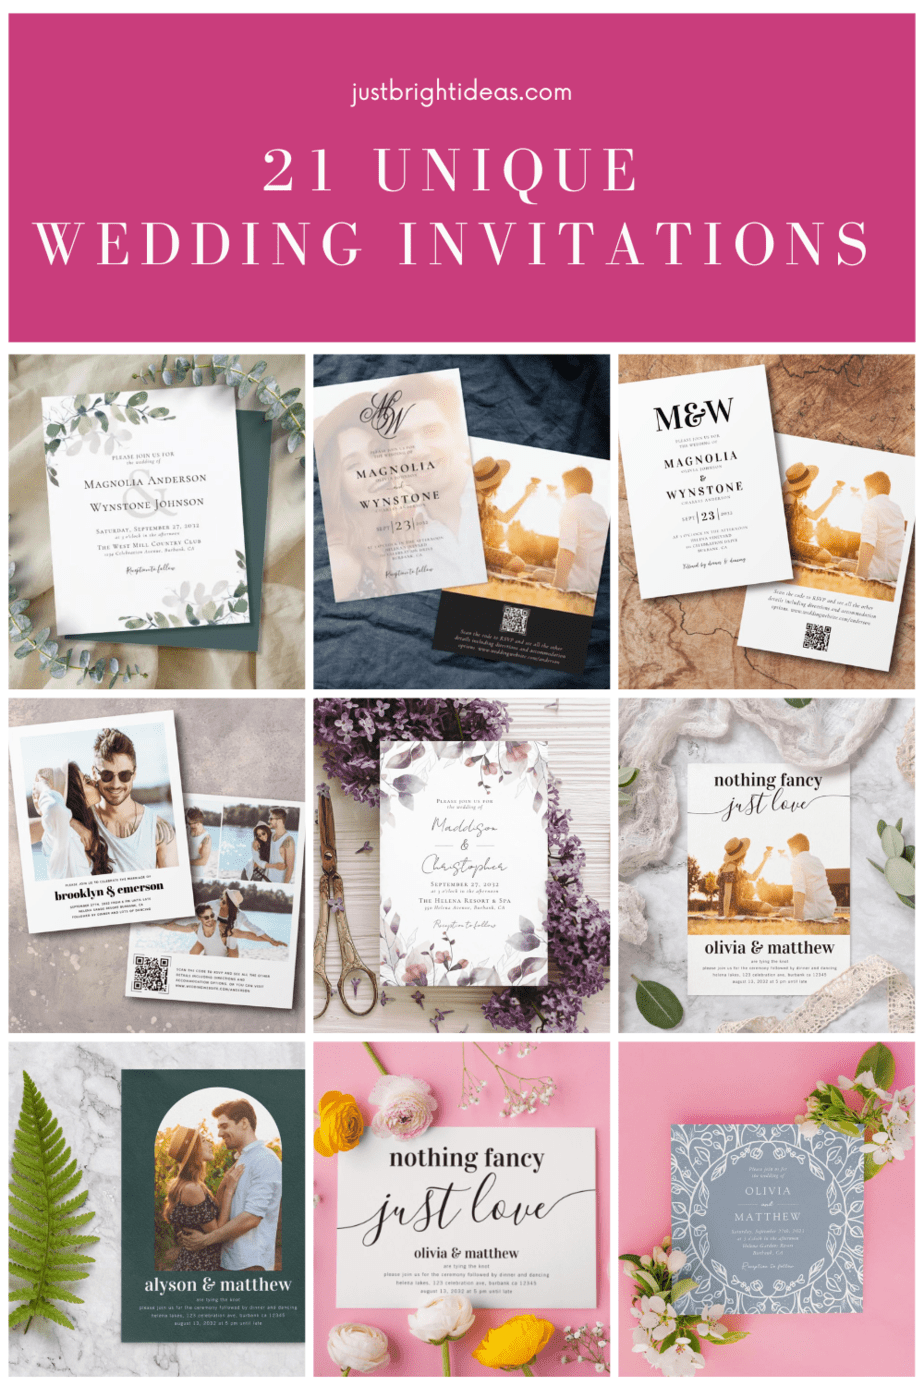 Unique Wedding Invitations for All Styles